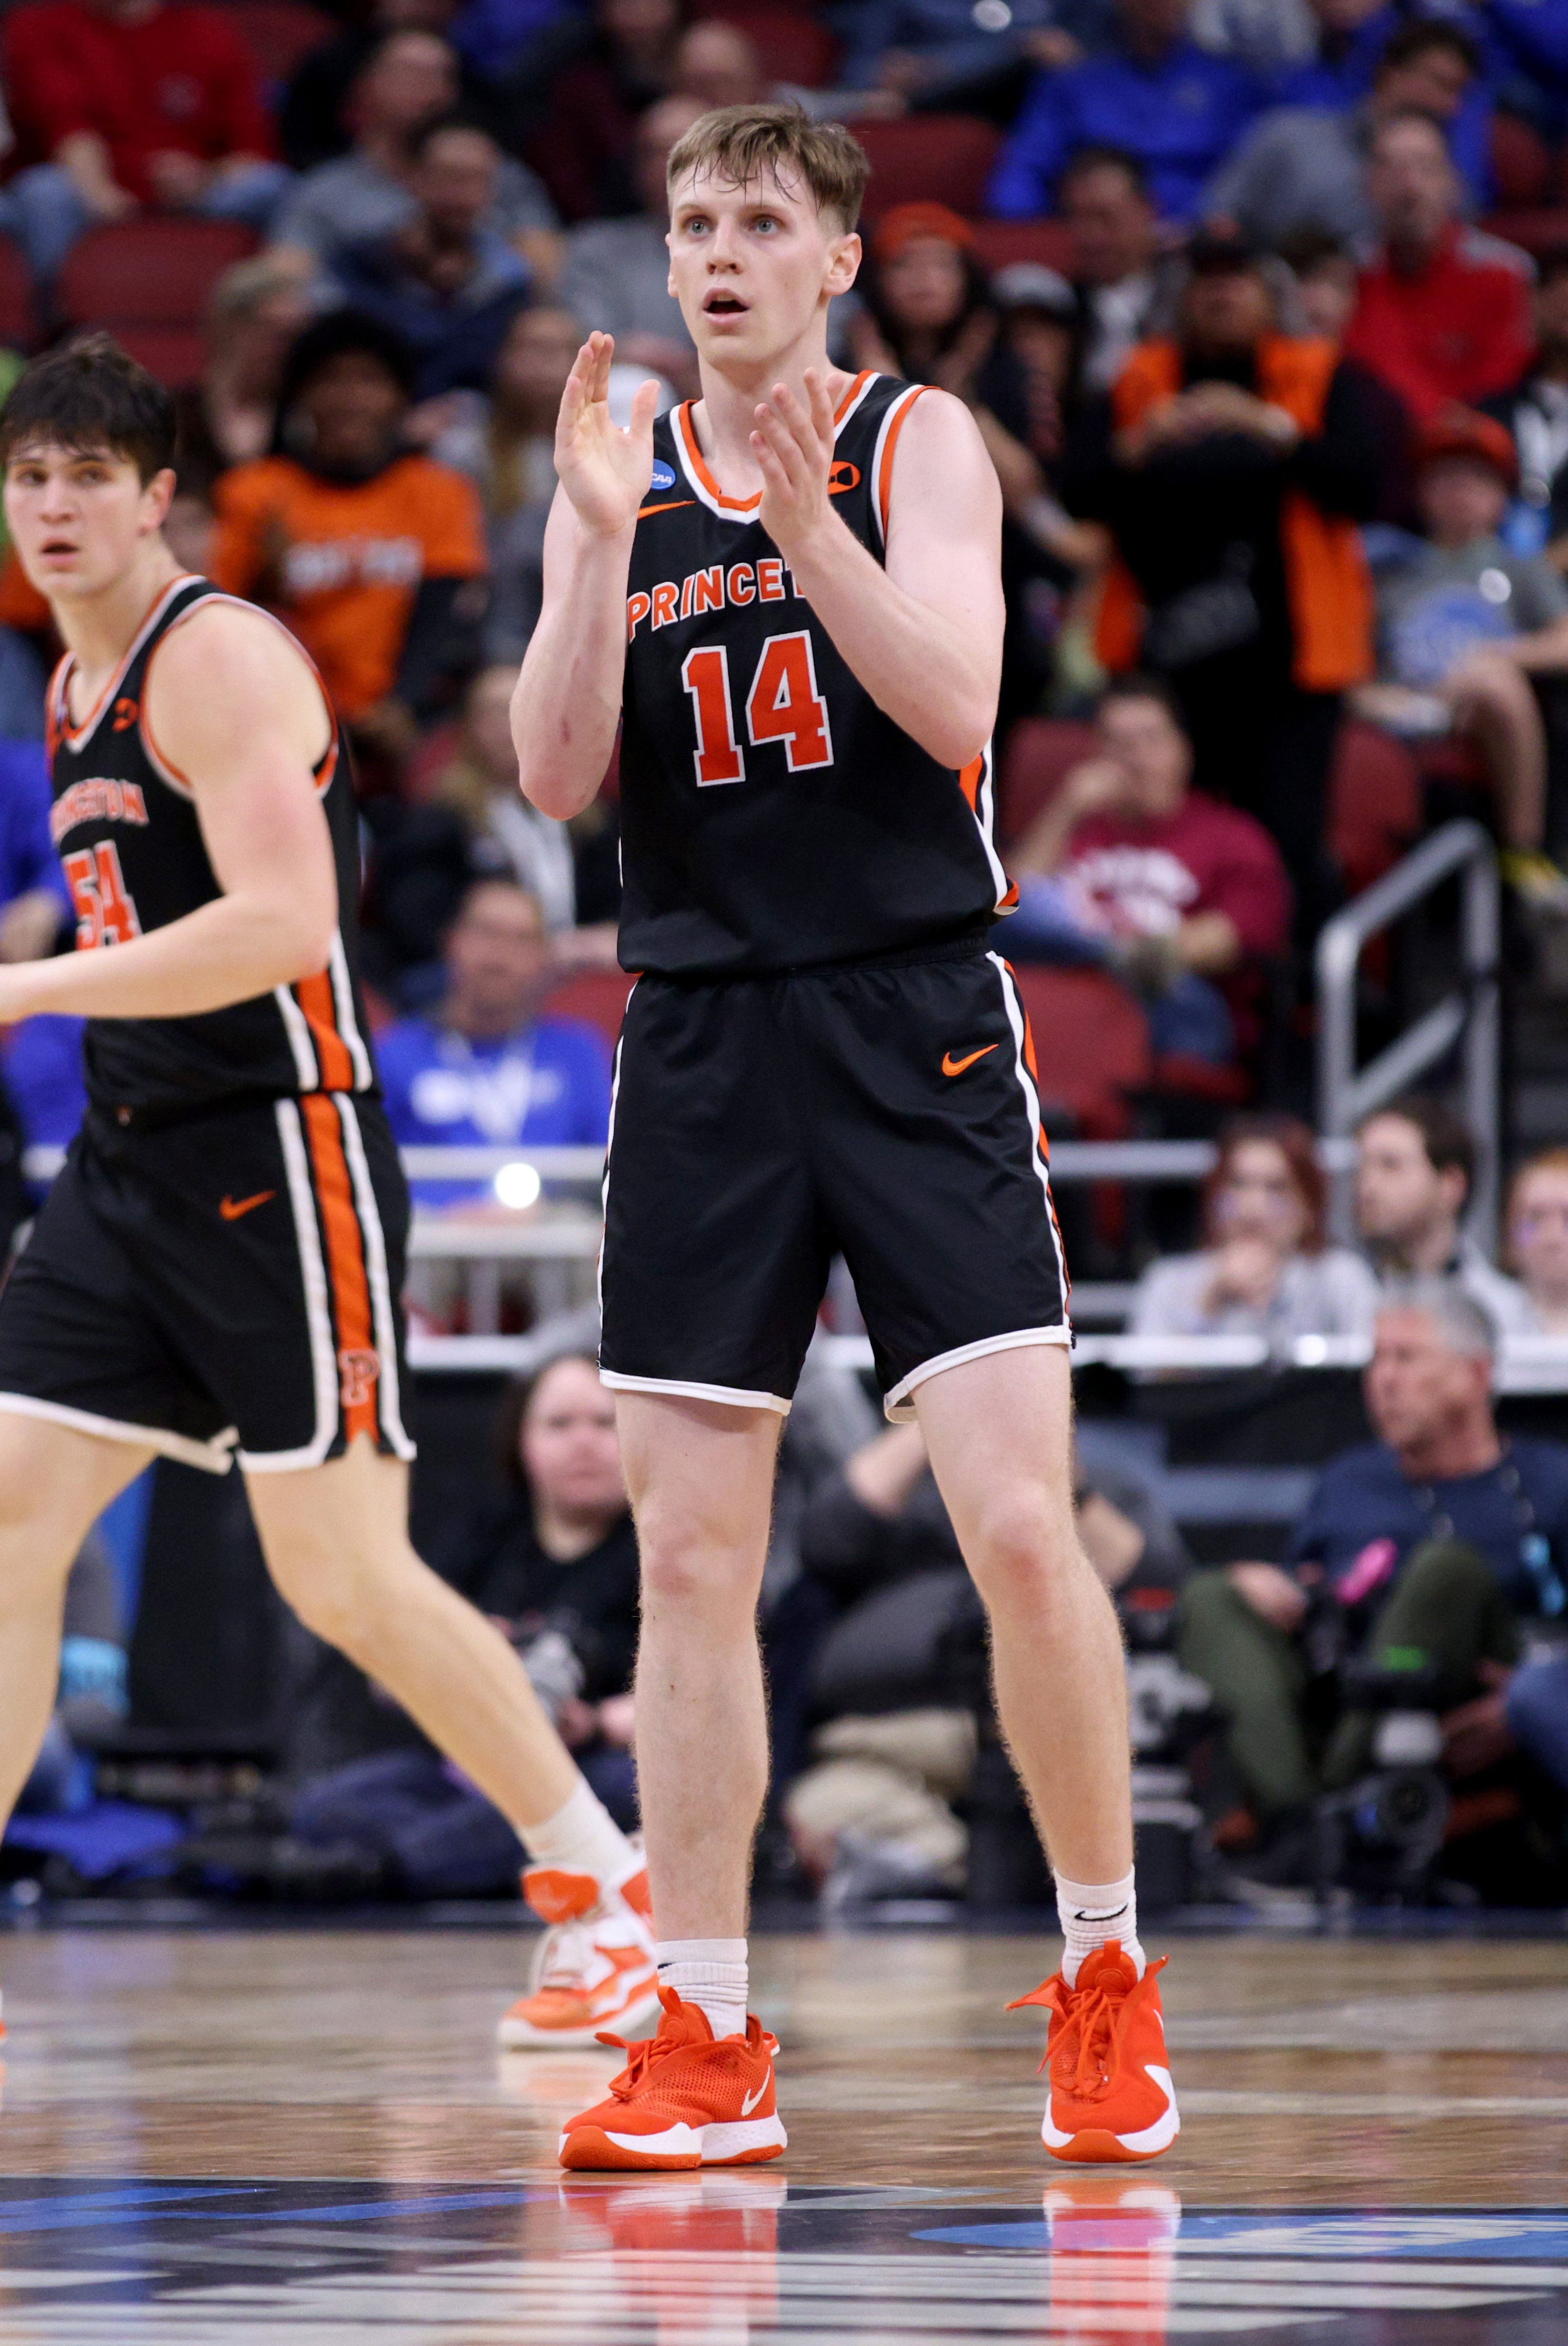 Mar 24, 2023; Louisville, KY, USA; Princeton Tigers guard Matt Allocco (14) reacts after a play during the first half of the NCAA tournament round of sixteen against the Creighton Bluejays at KFC YUM! Center. Mandatory Credit: Jordan Prather-USA TODAY Sports